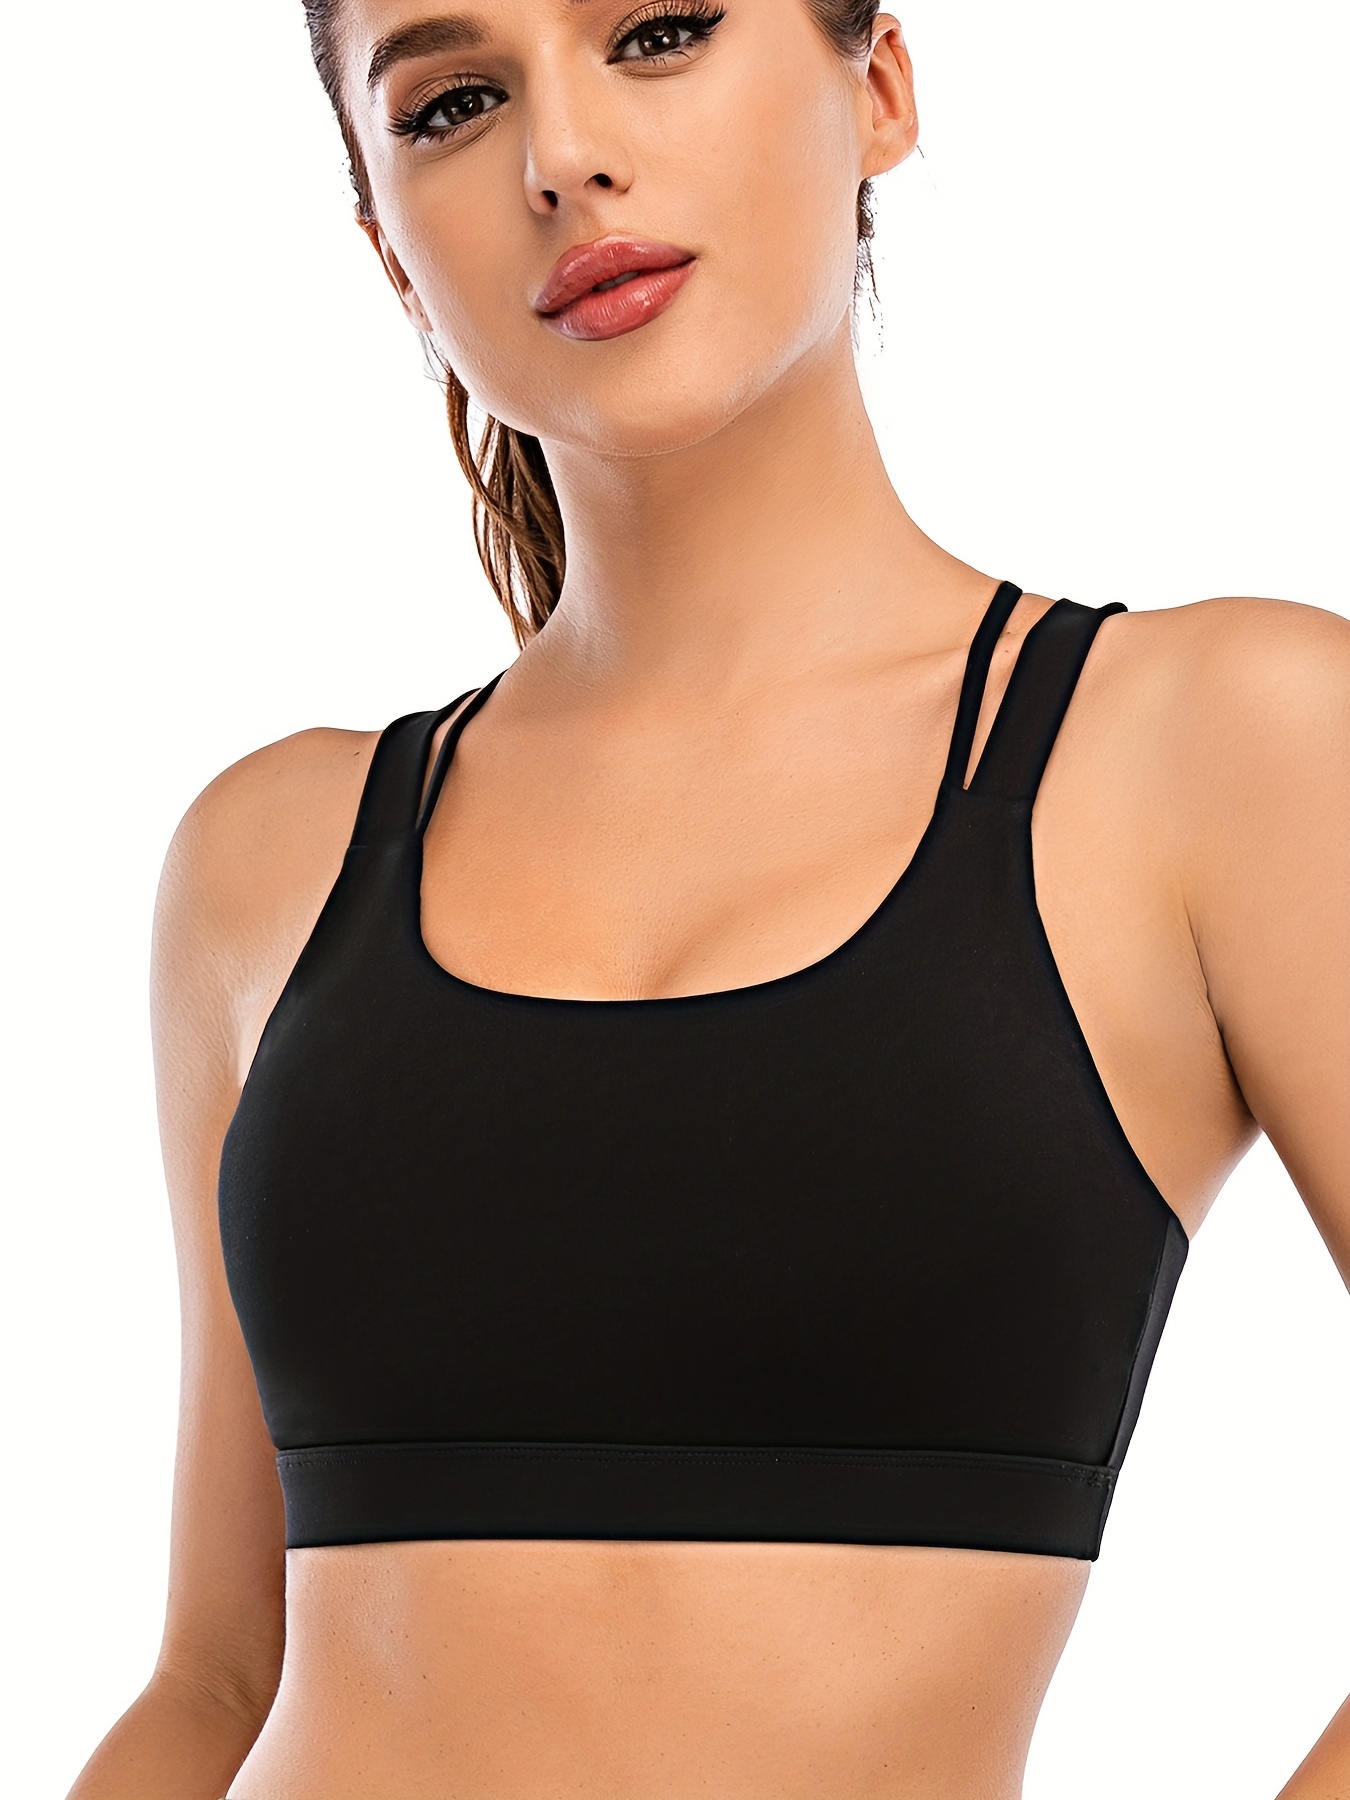 Sports Bras for Women. Backless. Padded. Medium Support. Exercise, Fitness,  Yoga, & Everyday Wear. Underwire Free. Cute.